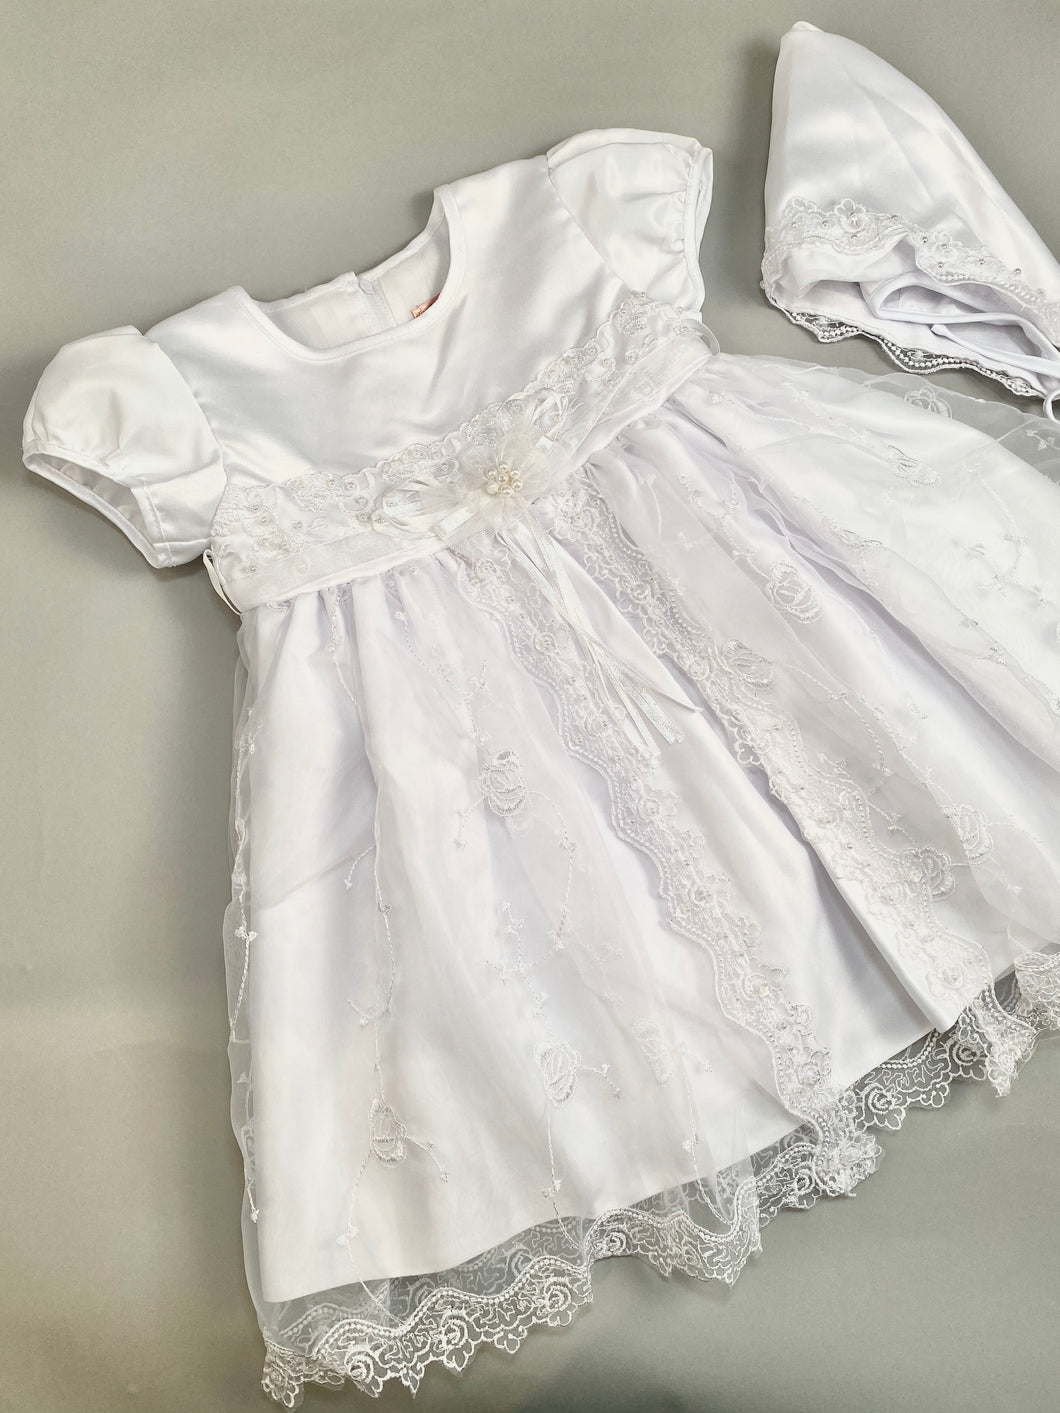 Dress 8 Girls Christening Baptismal Embroidered Lace Pearl Beaded Dress with Matching Hat